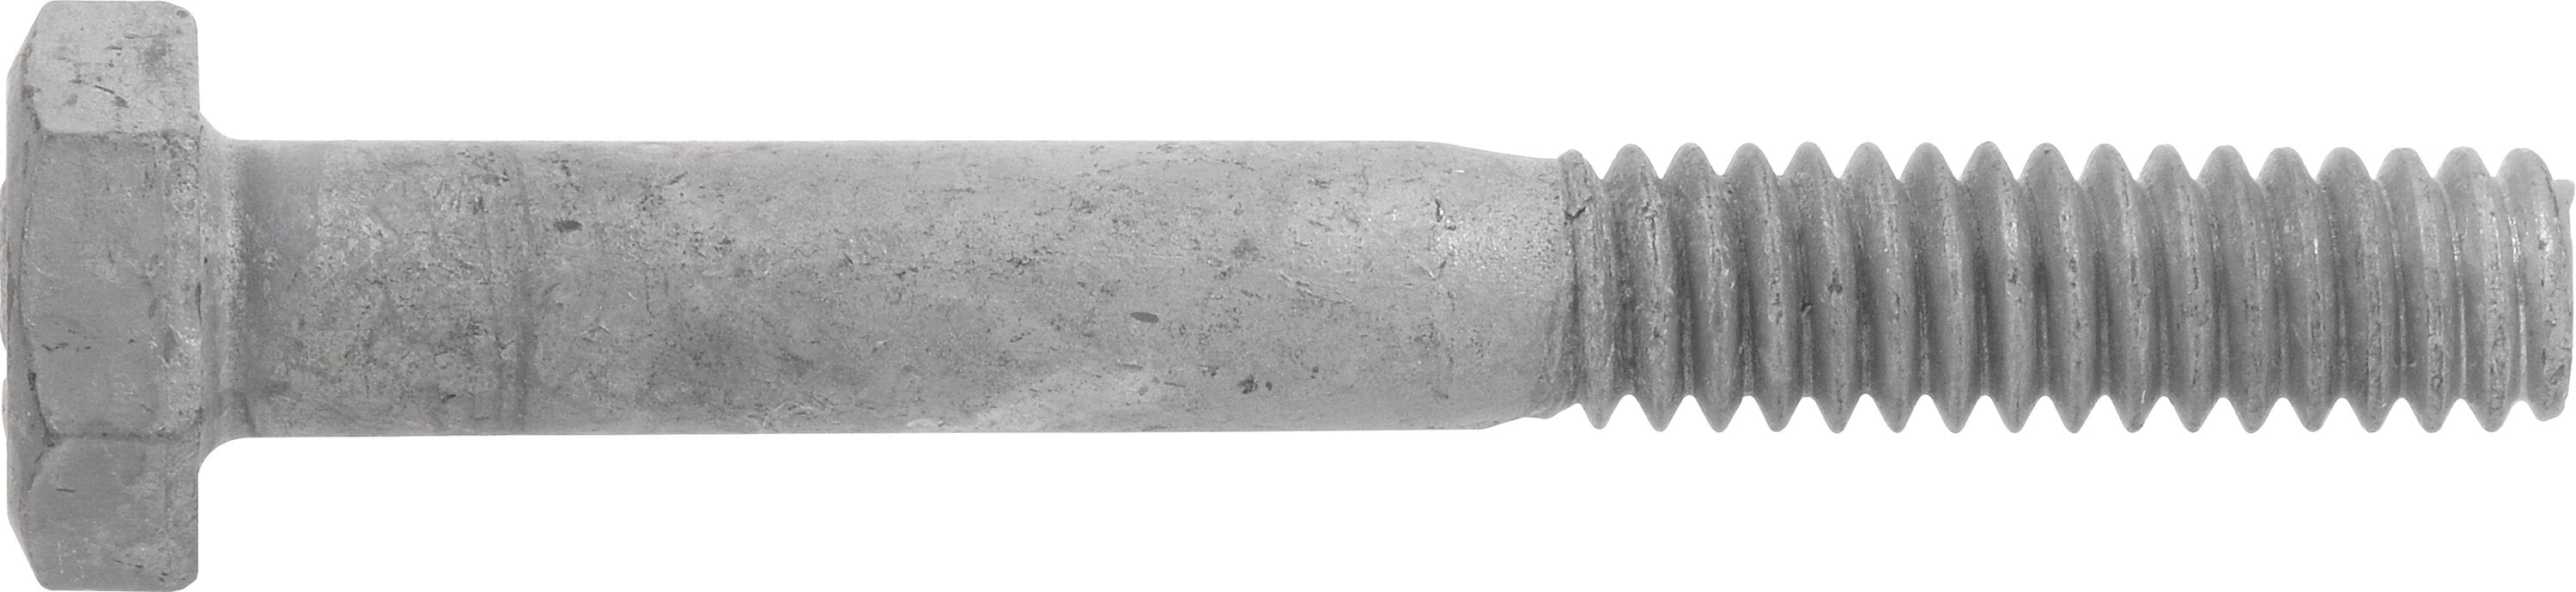 Hillman 1/2-in x 2-in Galvanized Coarse Thread Hex Bolt in the Hex Bolts  department at